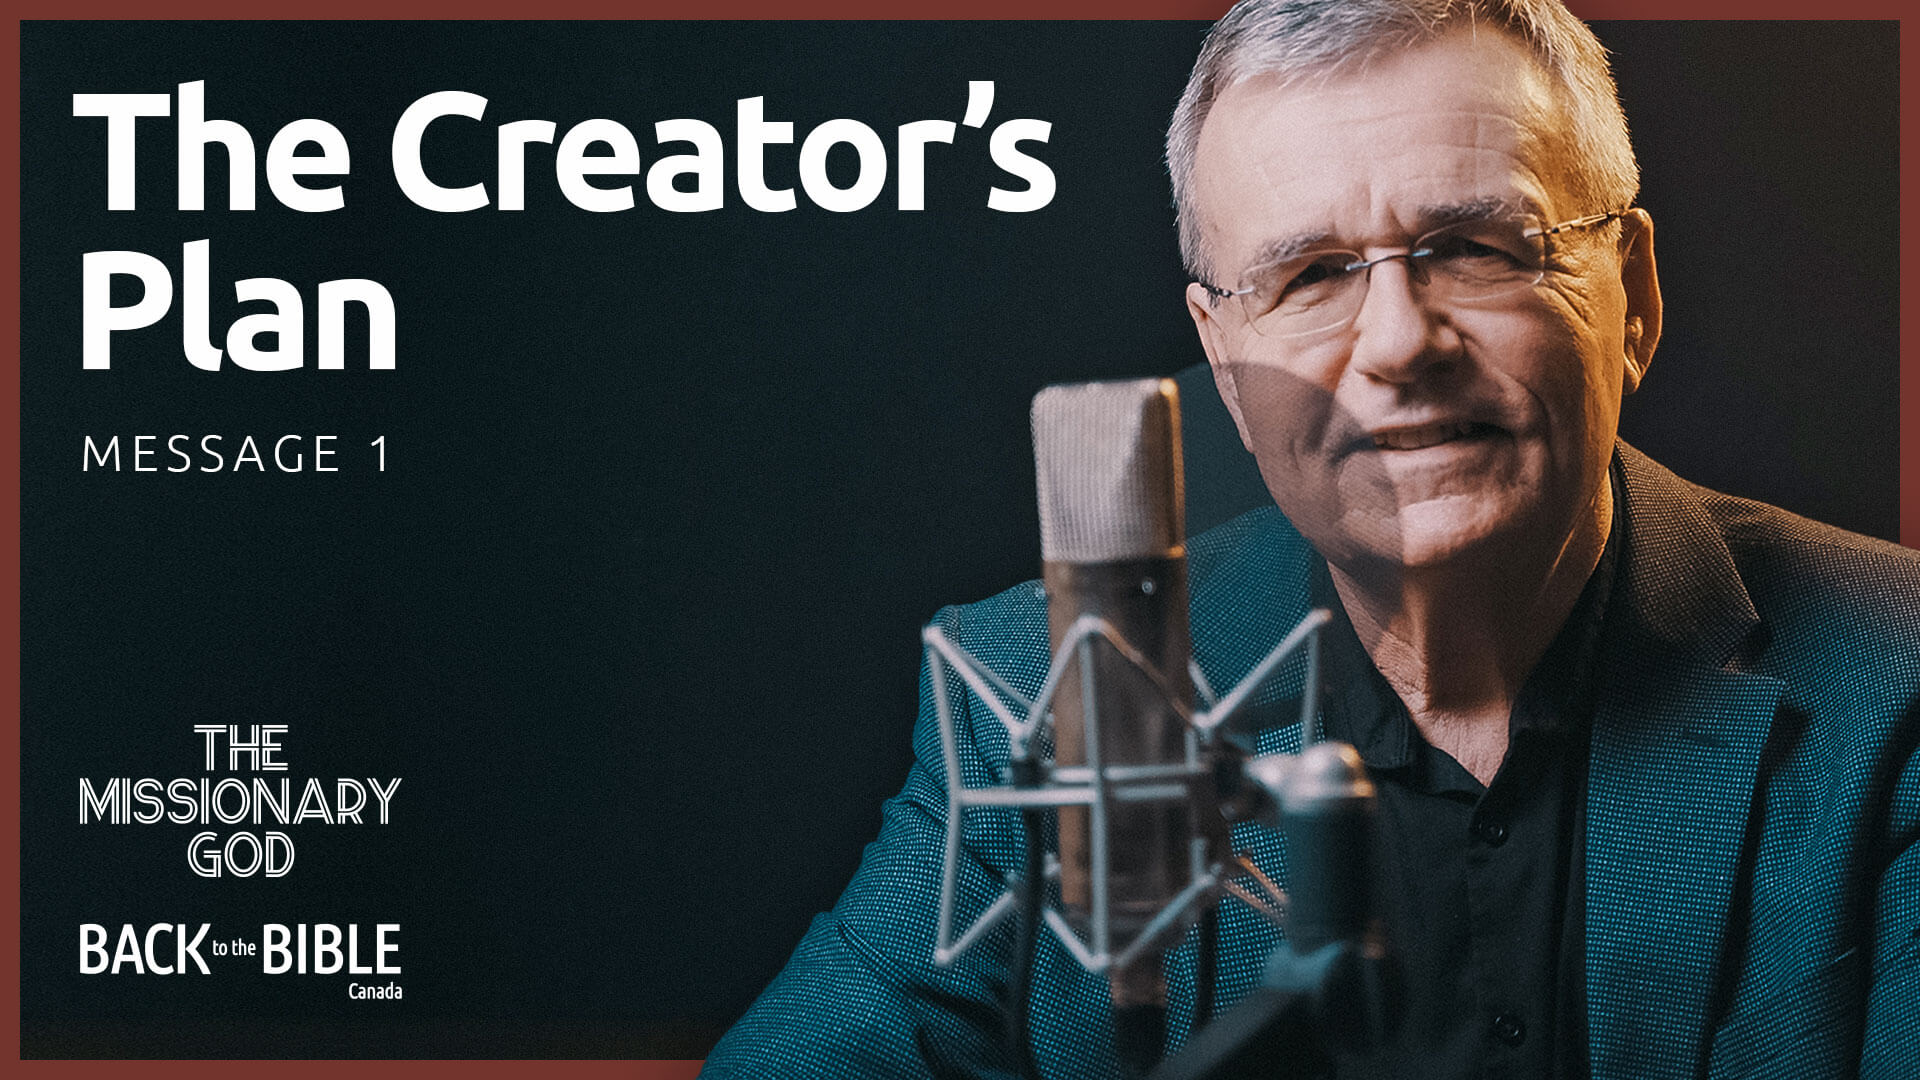 The Creator's Plan | Back to the Bible Canada with Dr. John Neufeld